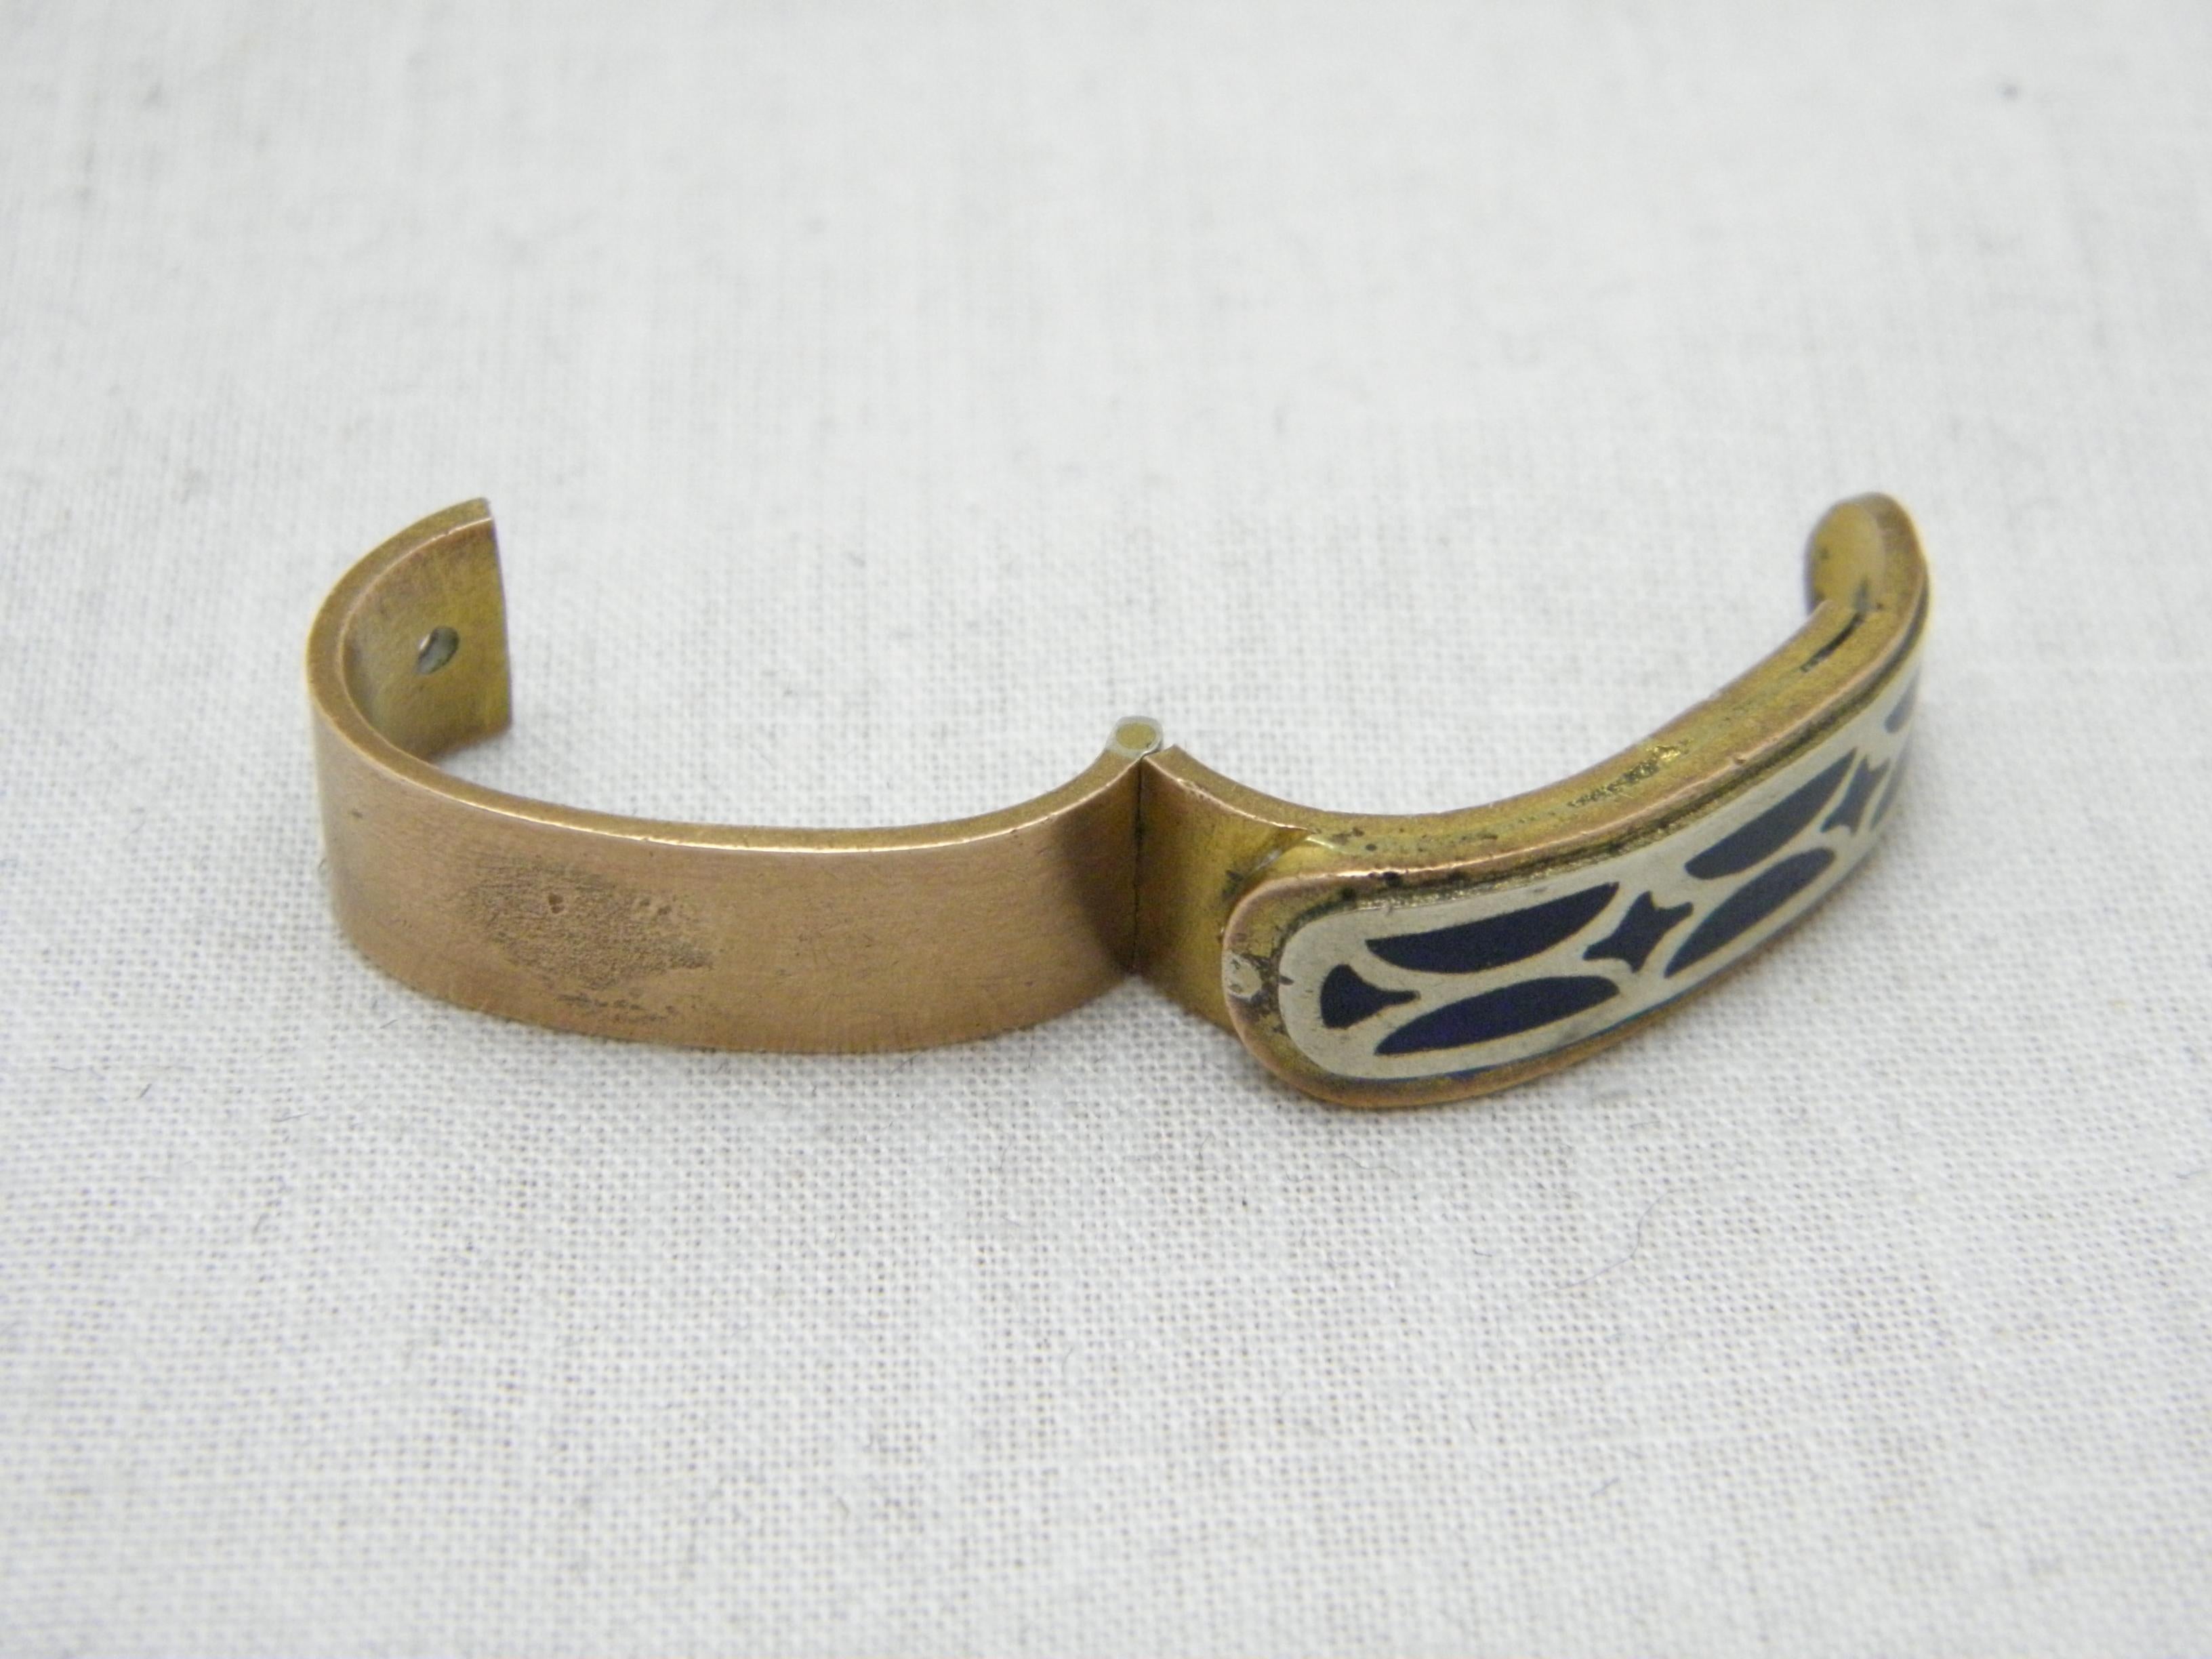 Bargain Vintage 14ct Gold Enamel Scarf Clip Holder c1930s Heavy 585 Purity 8g For Sale 4